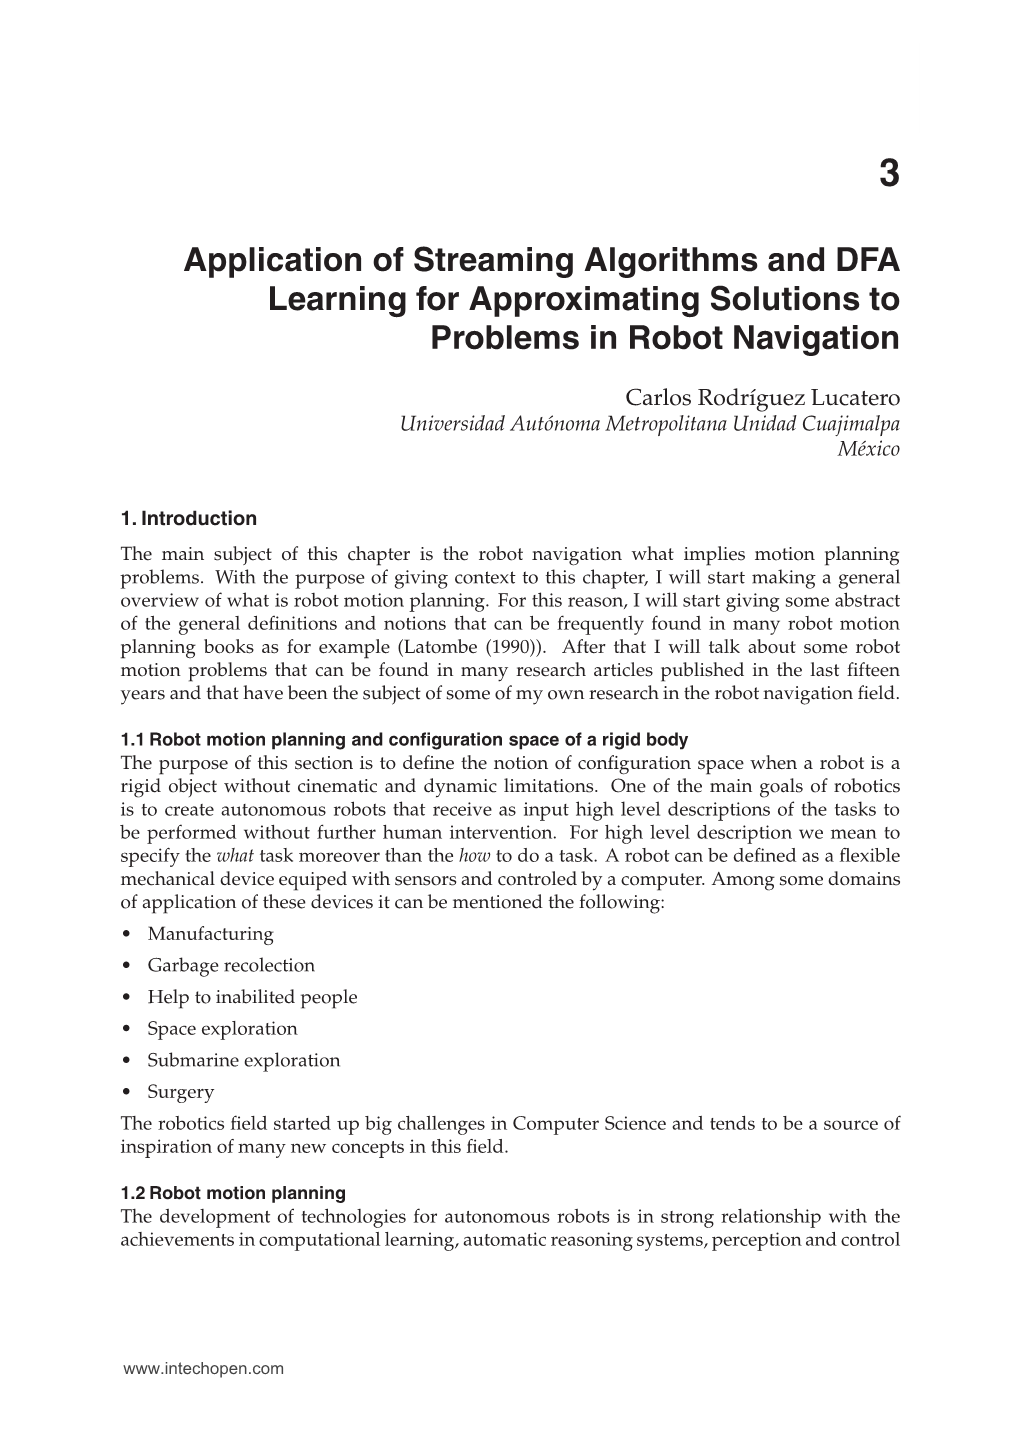 Application of Streaming Algorithms and DFA Learning for Approximating Solutions to Problems in Robot Navigation